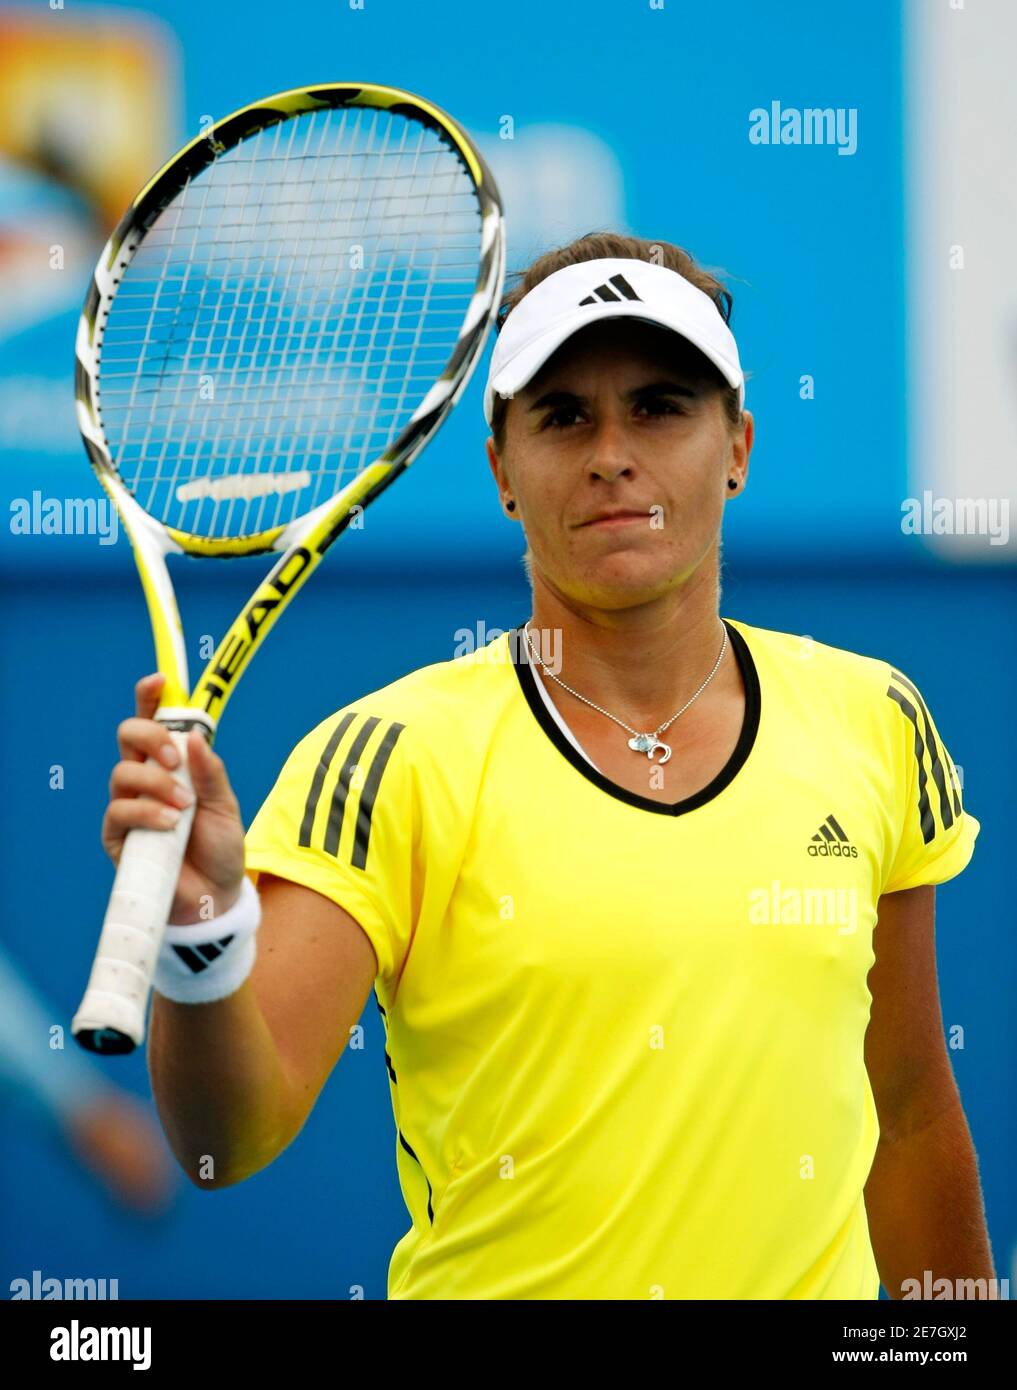 Spain's Anabel Medina Garrigues celebrates after winning her match against  Italy's Flavia Pennetta at the Australian Open tennis tournament in  Melbourne January 24, 2009. REUTERS/Darren Whiteside (AUSTRALIA Stock Photo  - Alamy